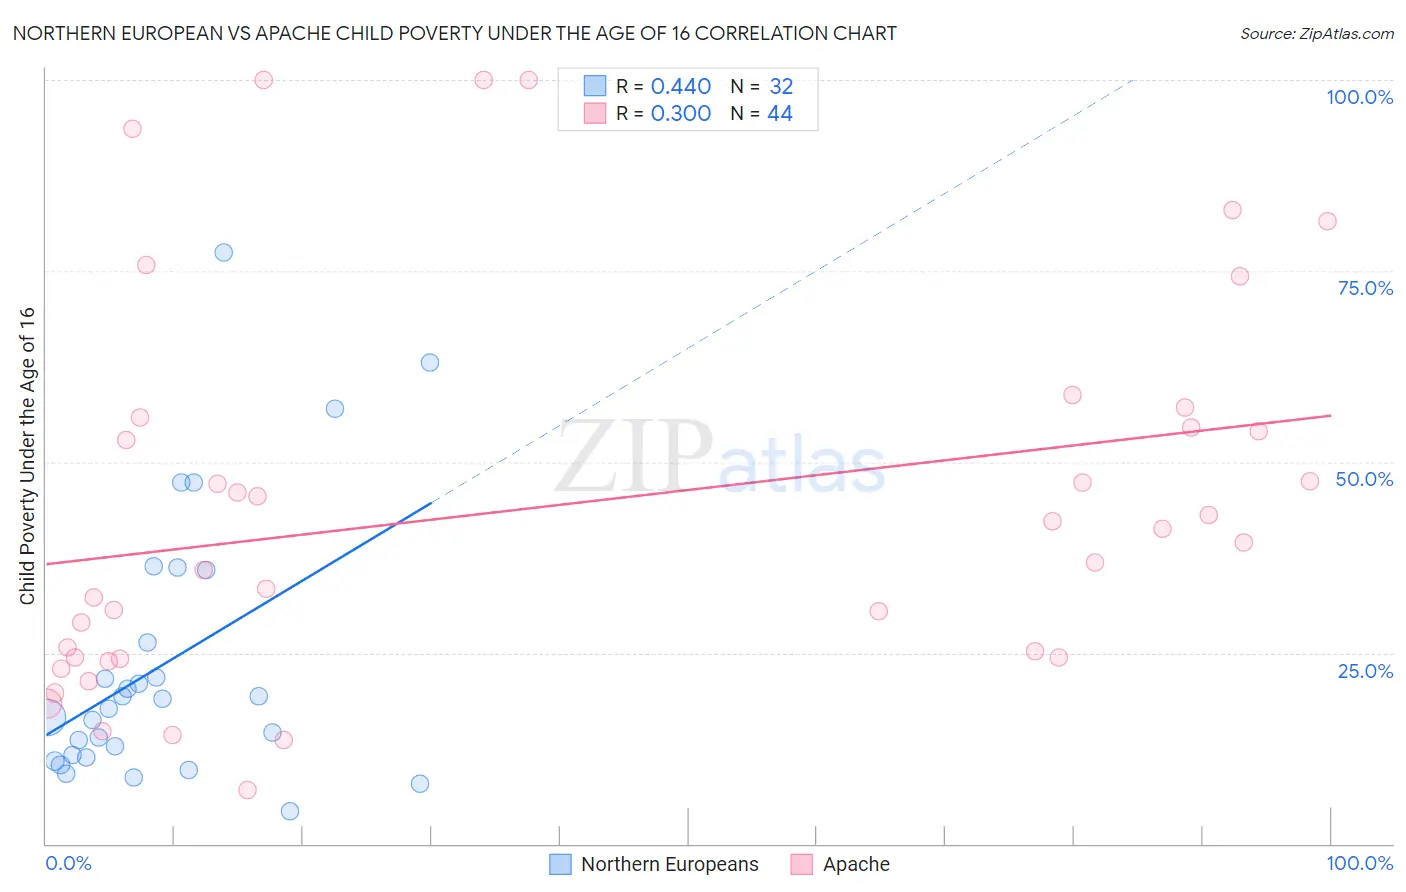 Northern European vs Apache Child Poverty Under the Age of 16